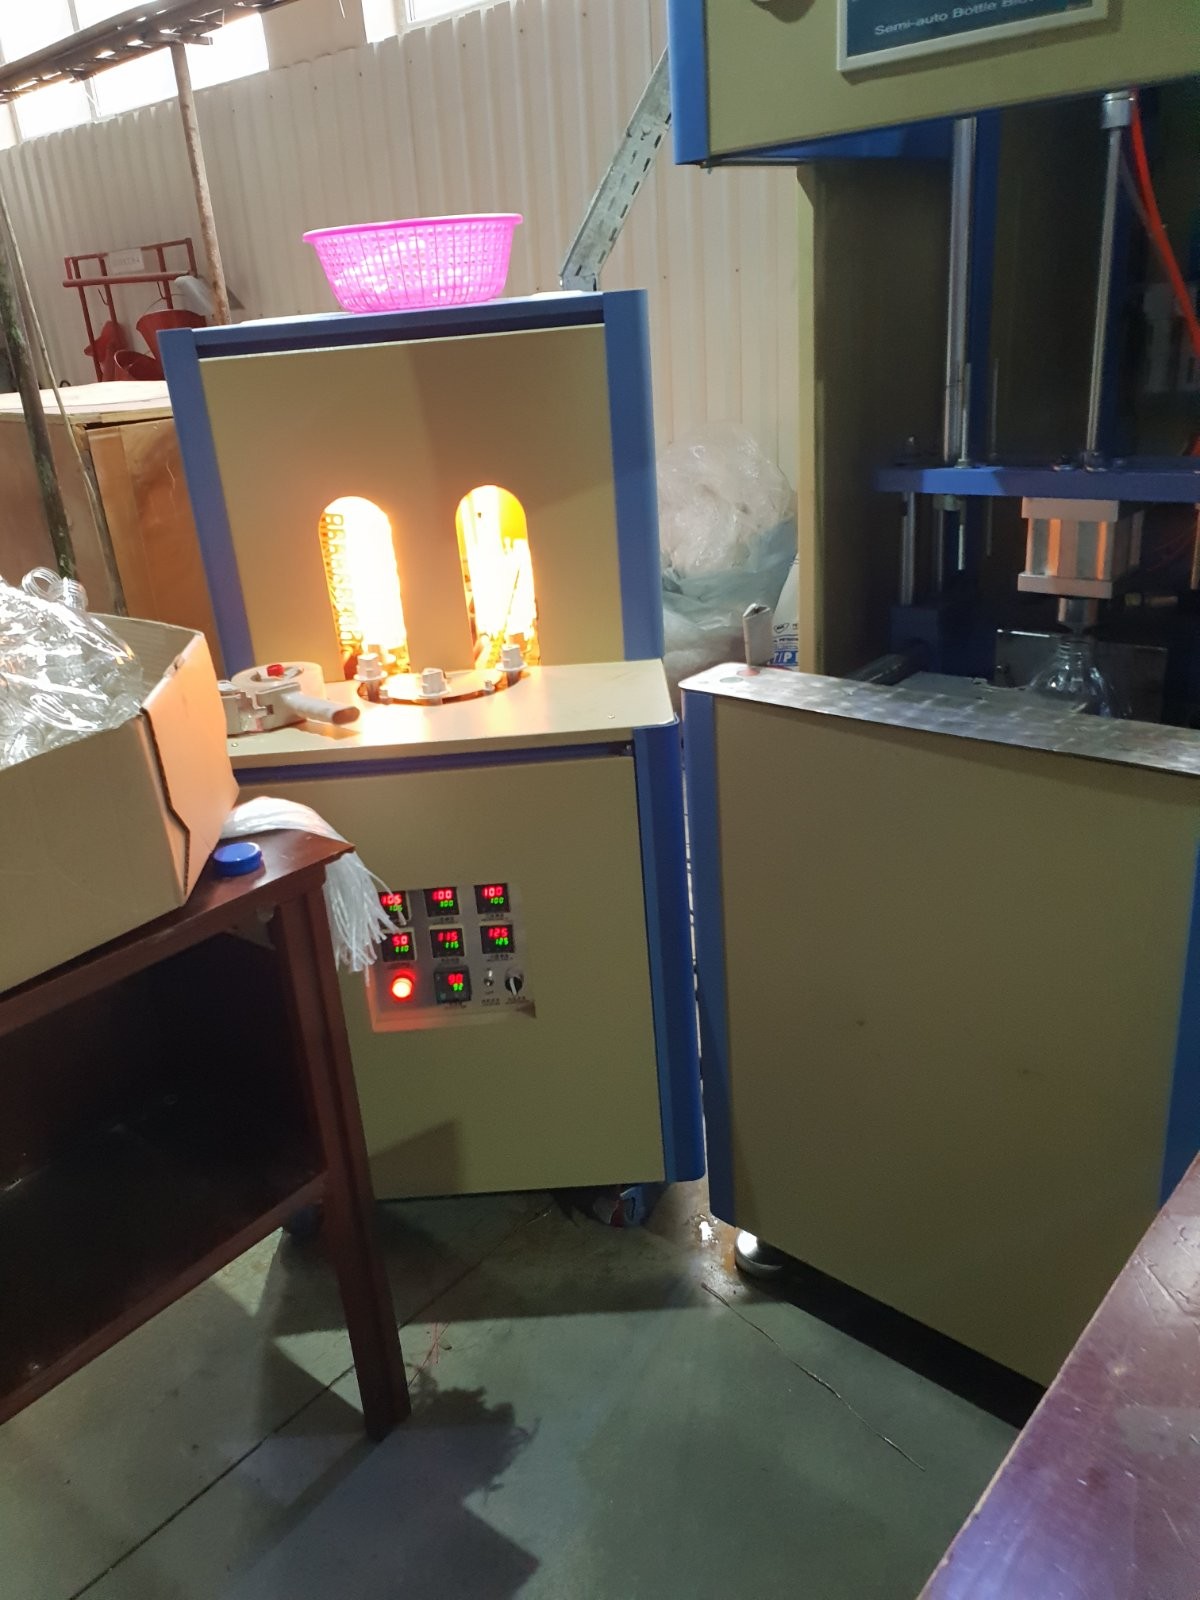 A-880 heating oven